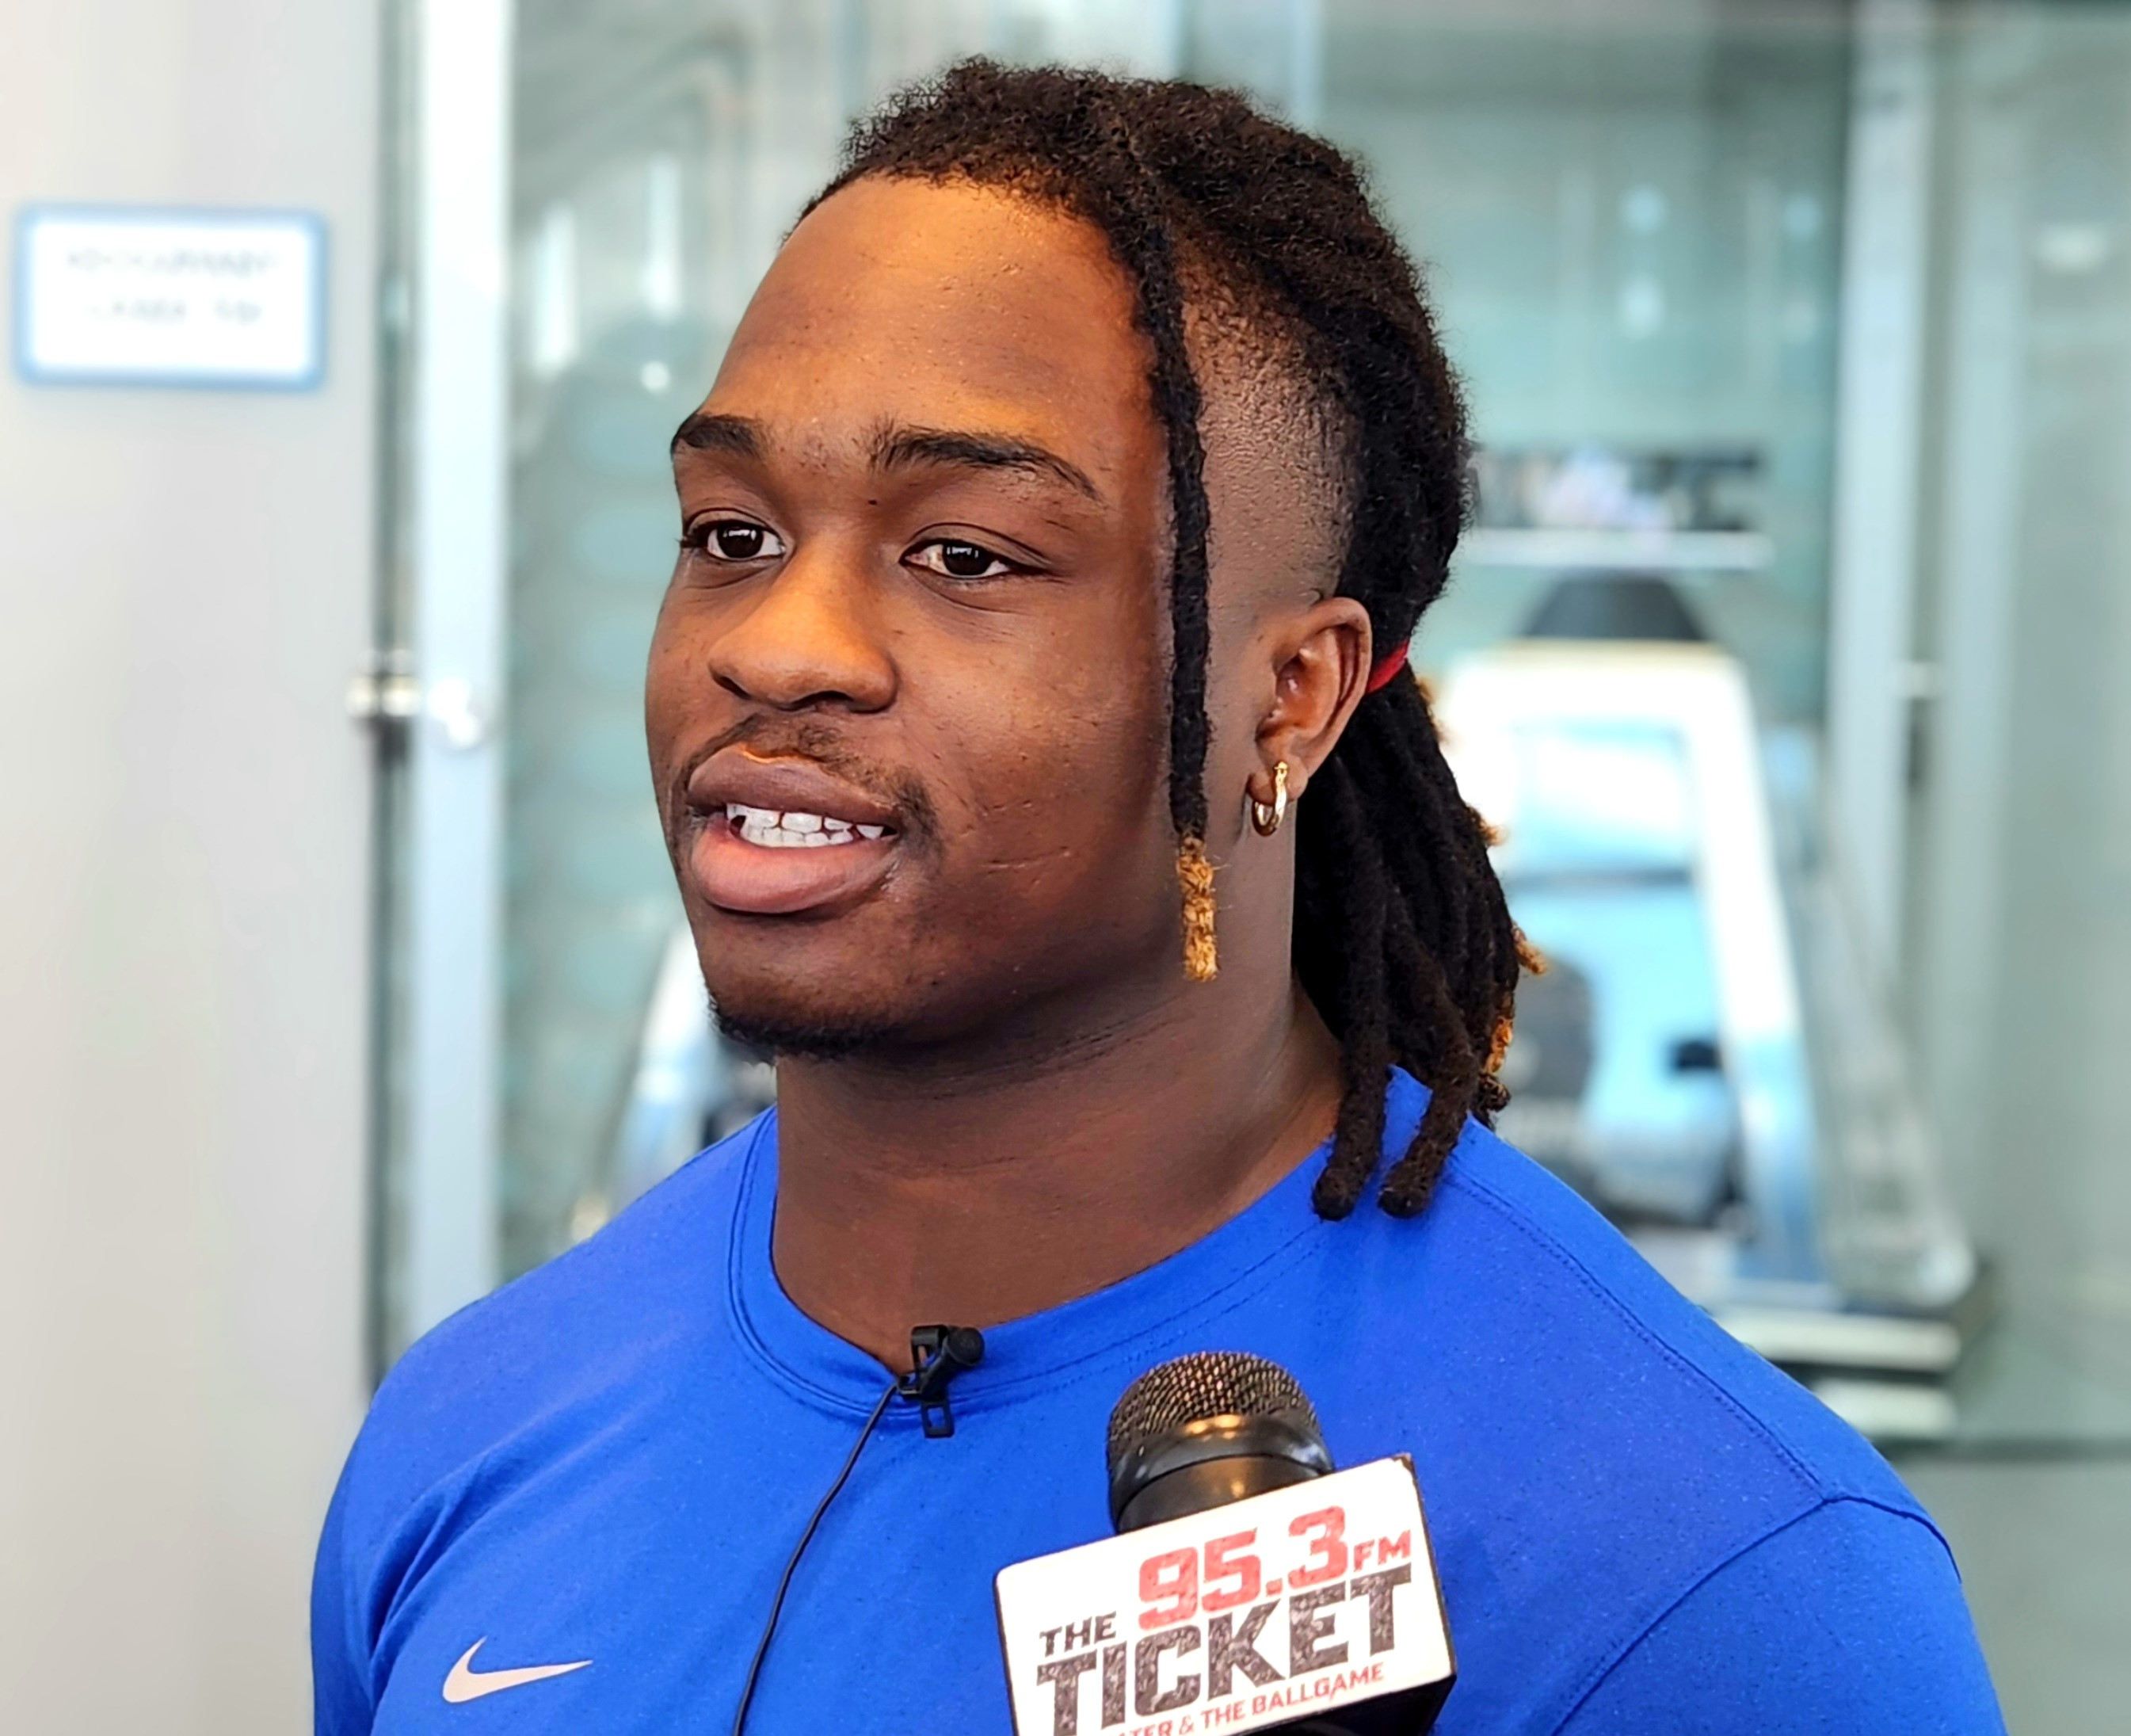 ASHTON JEANTY: FORTY MINUTES, IN STUDIO, WITH BOISE STATE'S STAR RUNNING BACK